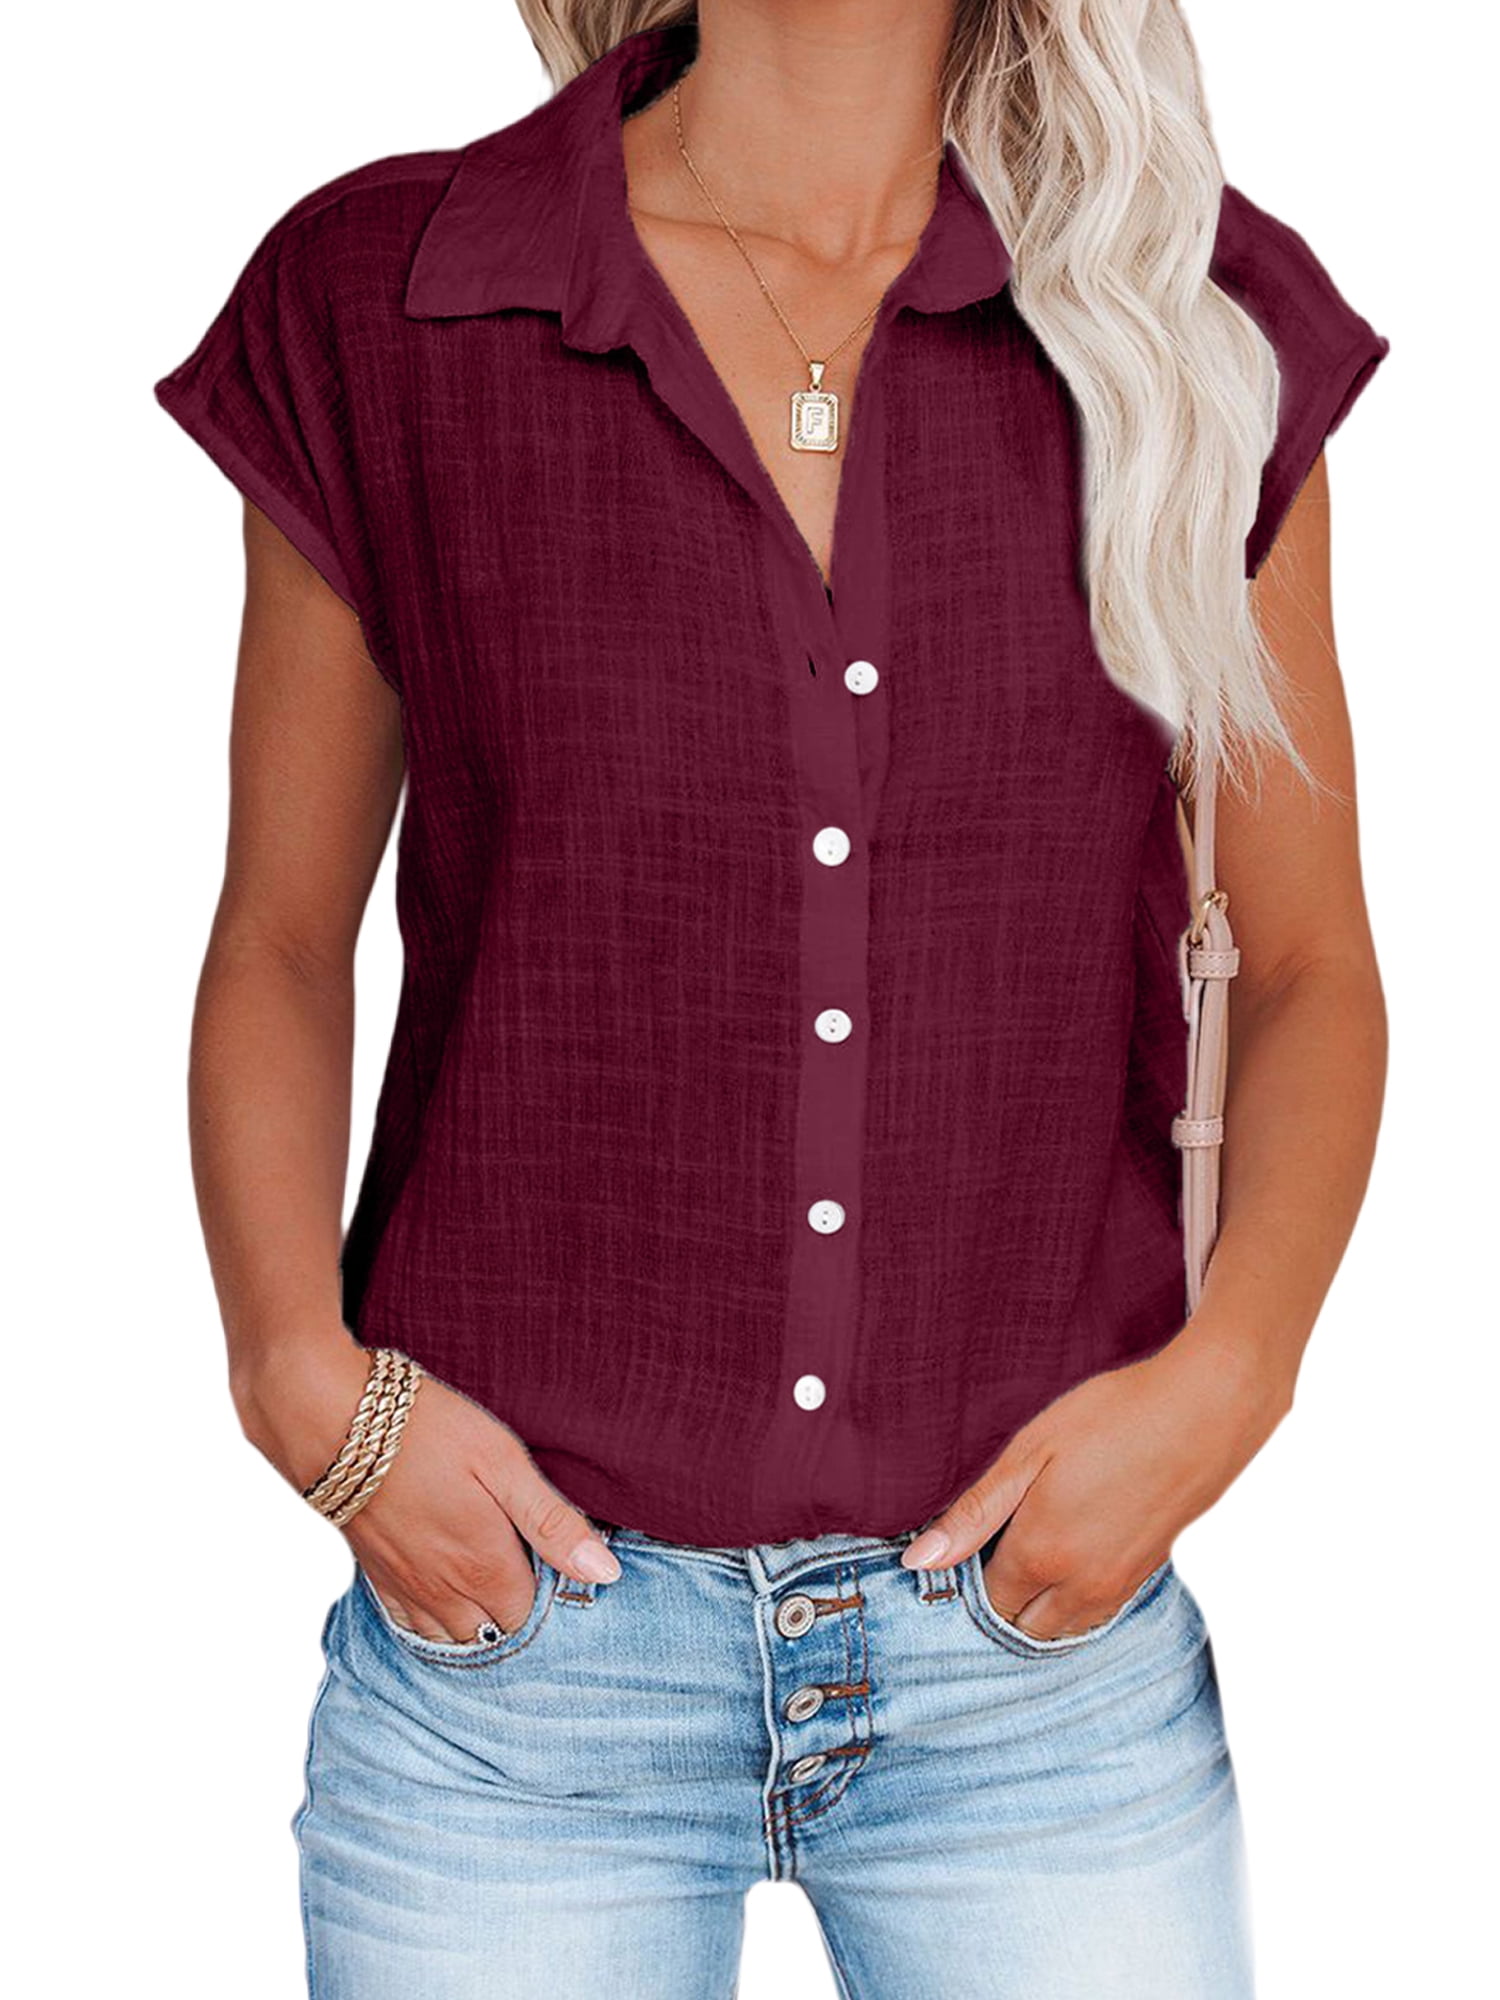 Button Down Shirts for Women Lapel Solid Color Short Sleeve Cardigan Summer  Casual Baggy Comfy Blouse Tops